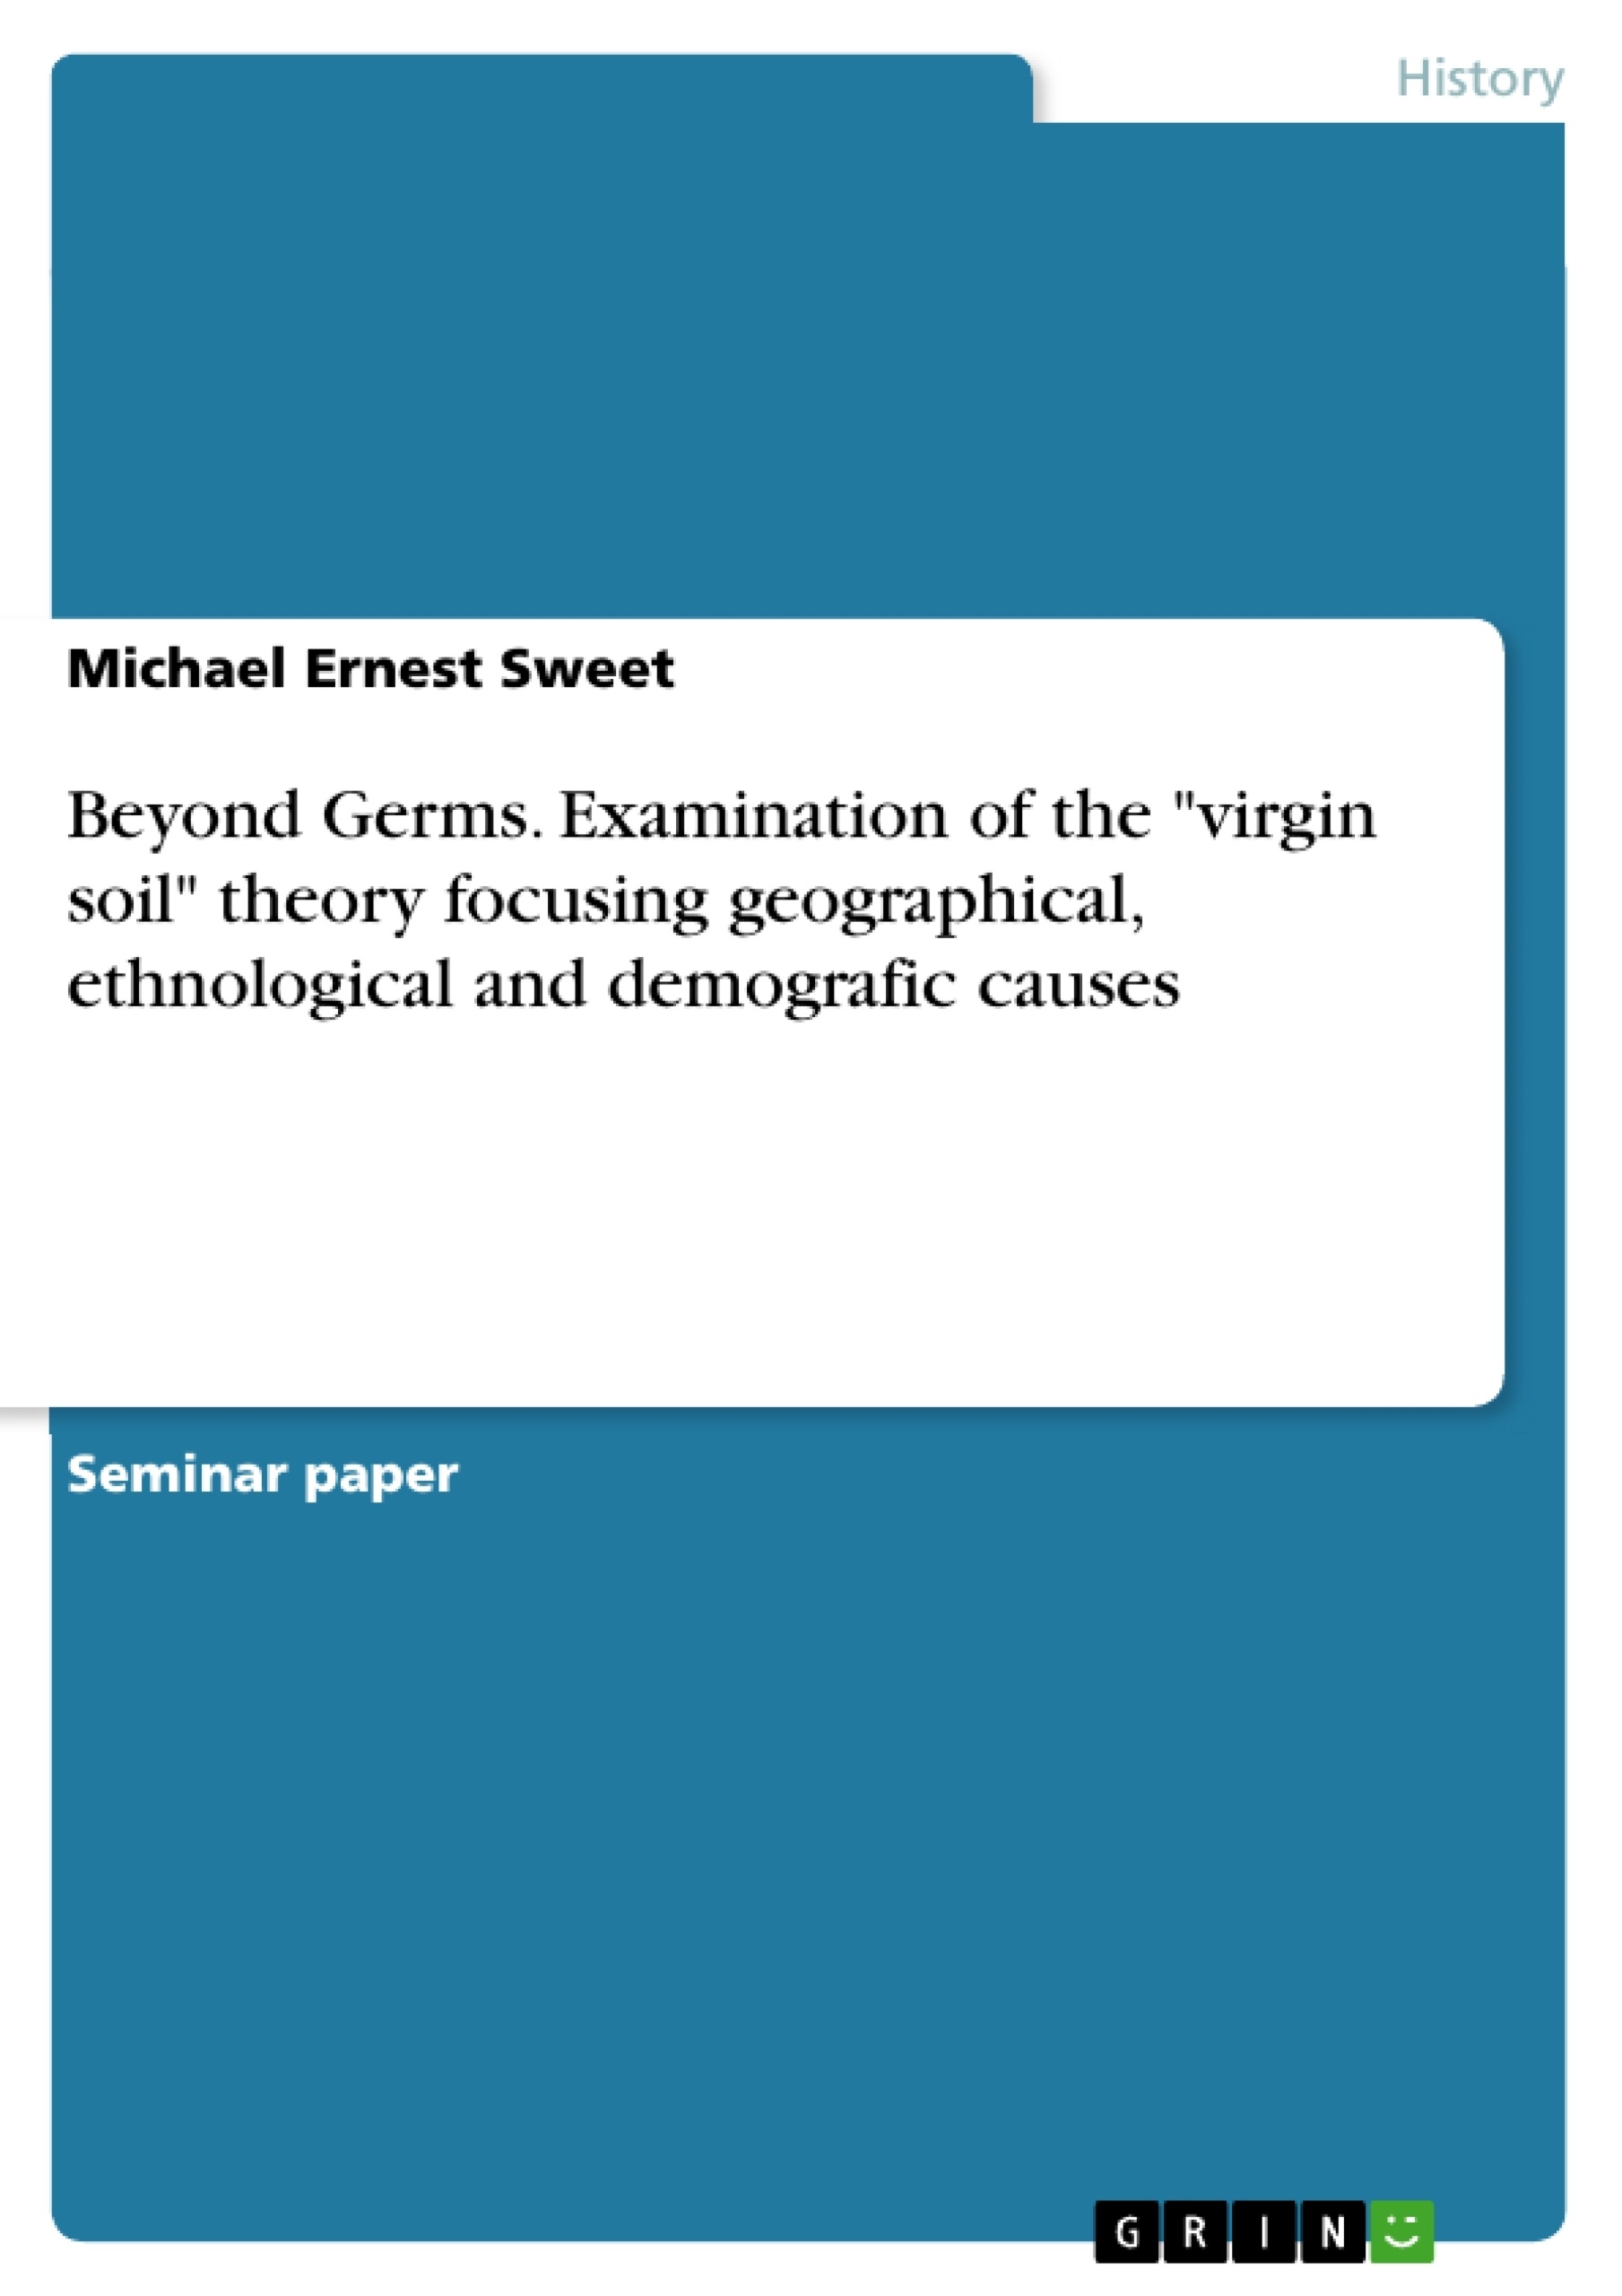 Title: Beyond Germs. Examination of the "virgin soil" theory focusing geographical, ethnological and demografic causes